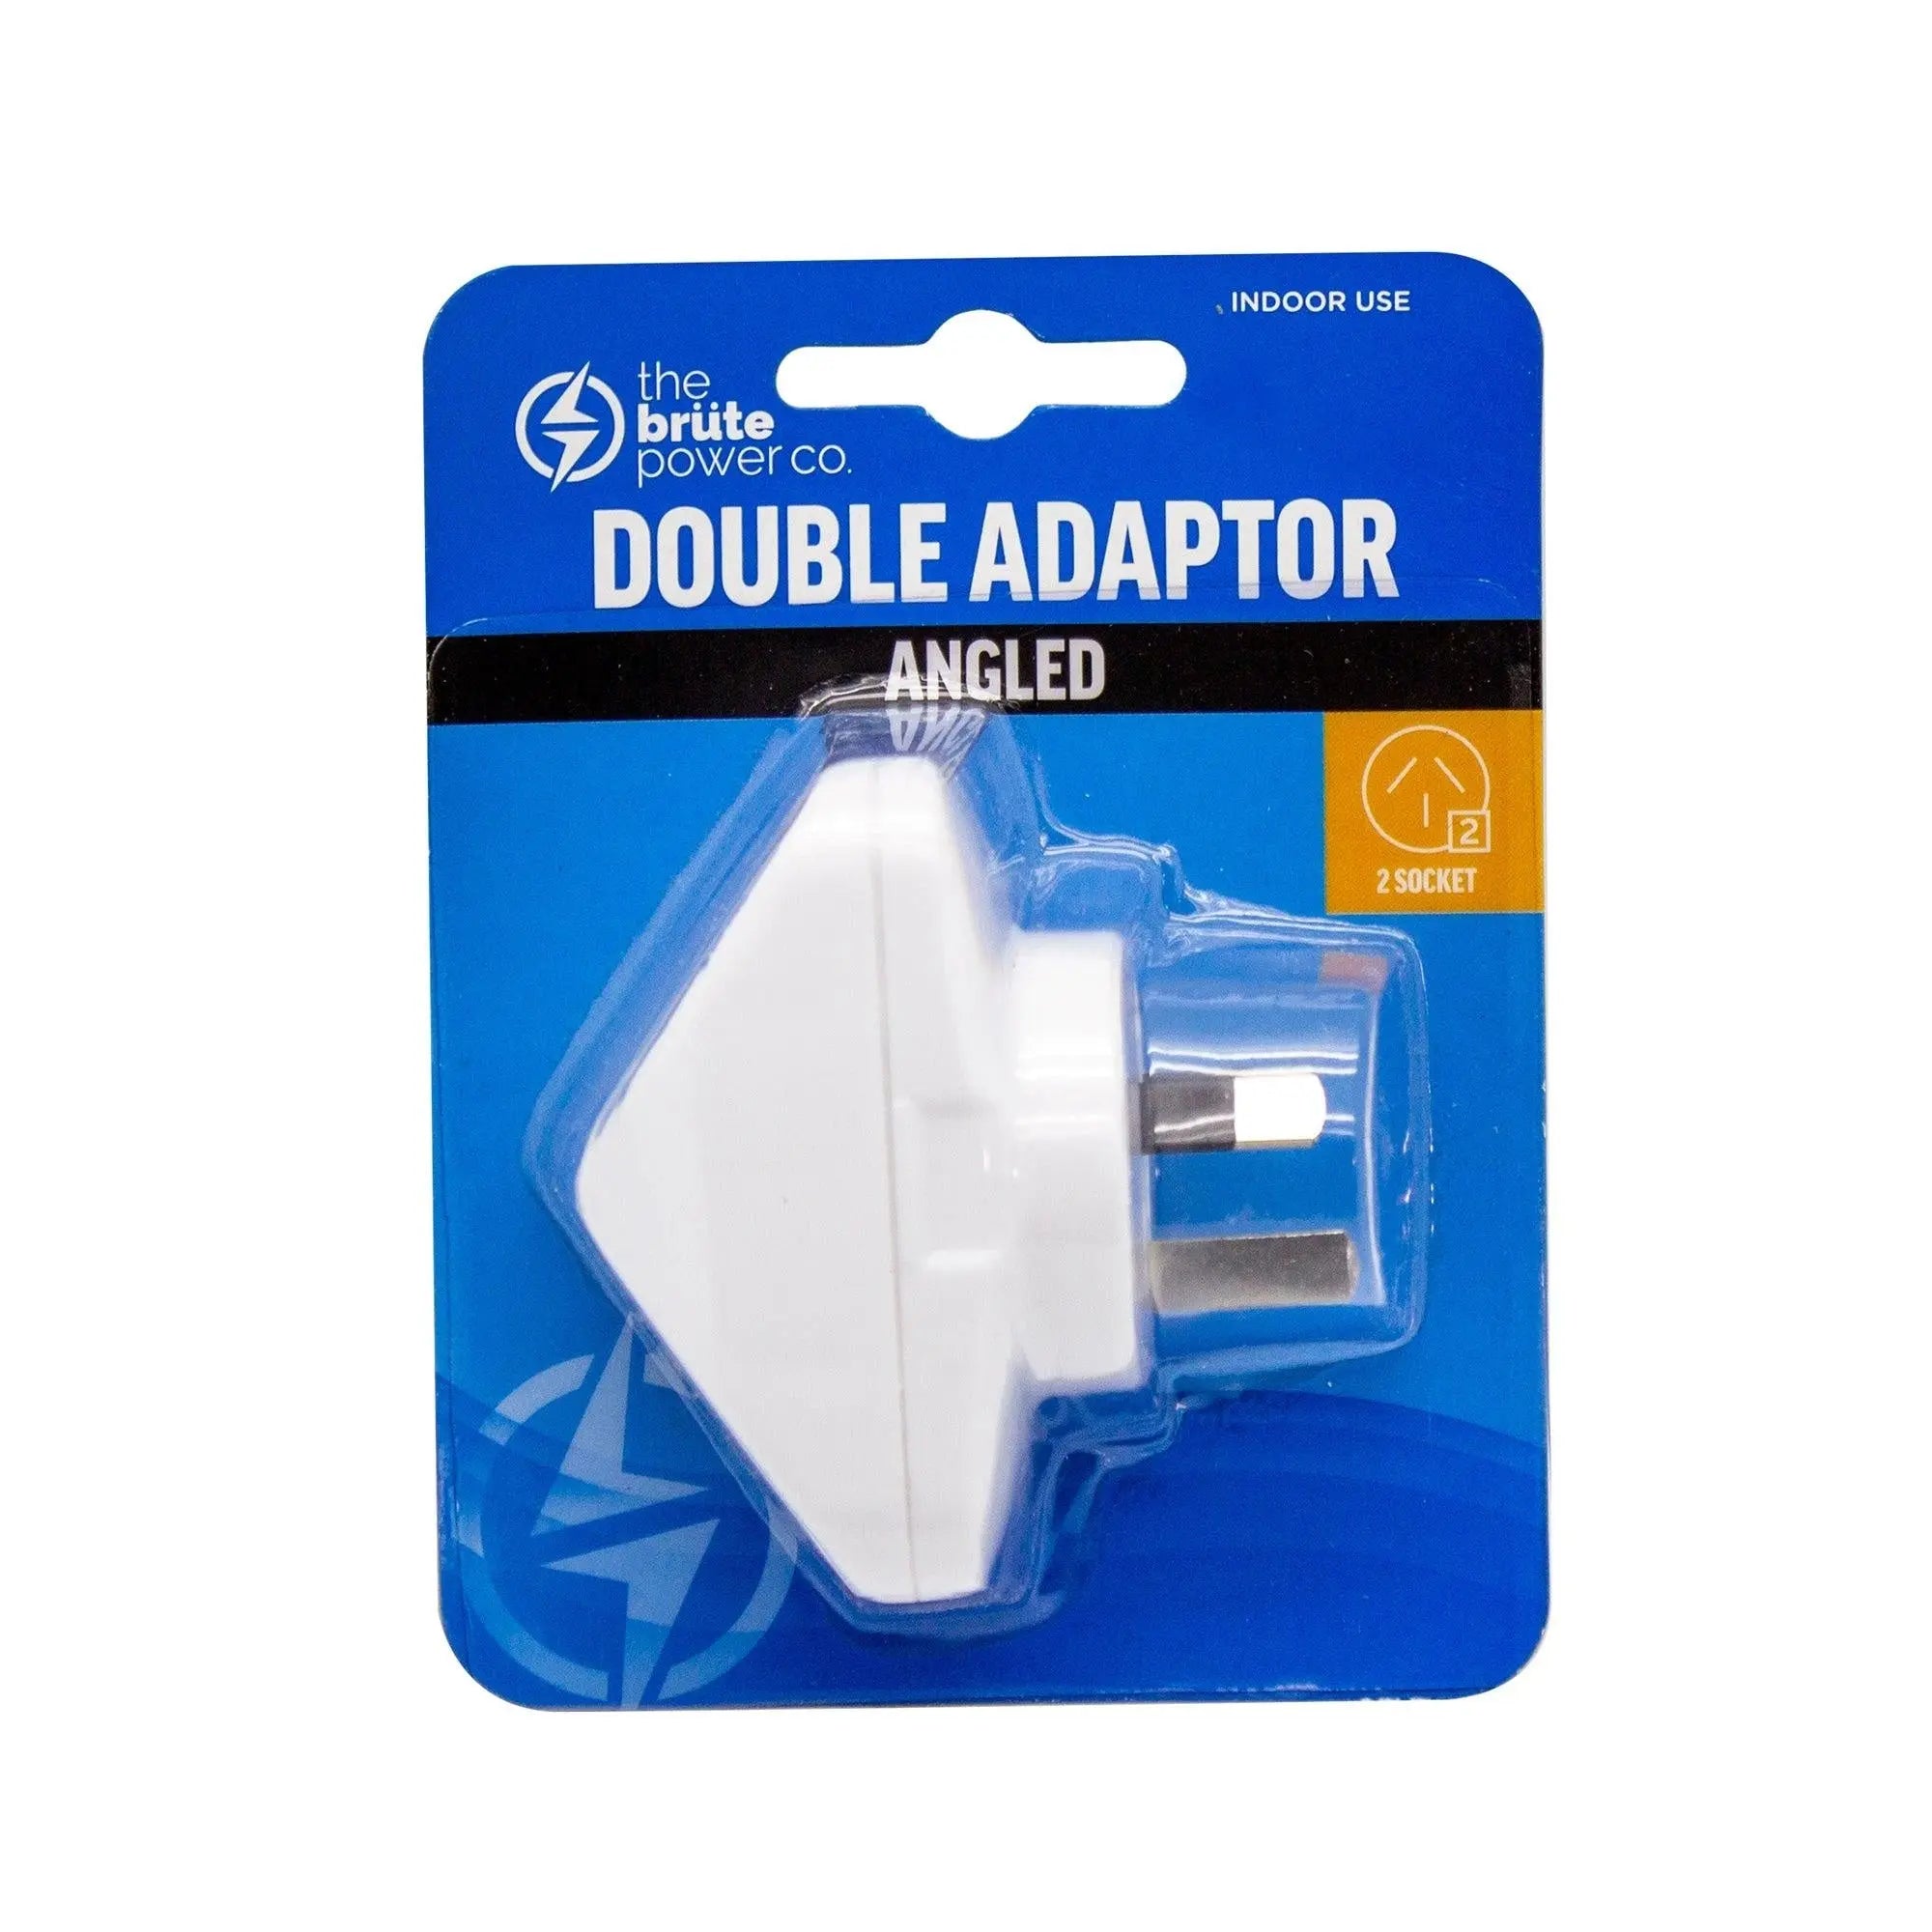 THE BRUTE POWER CO. Double Adaptor - Angled THE BRUTE POWER CO